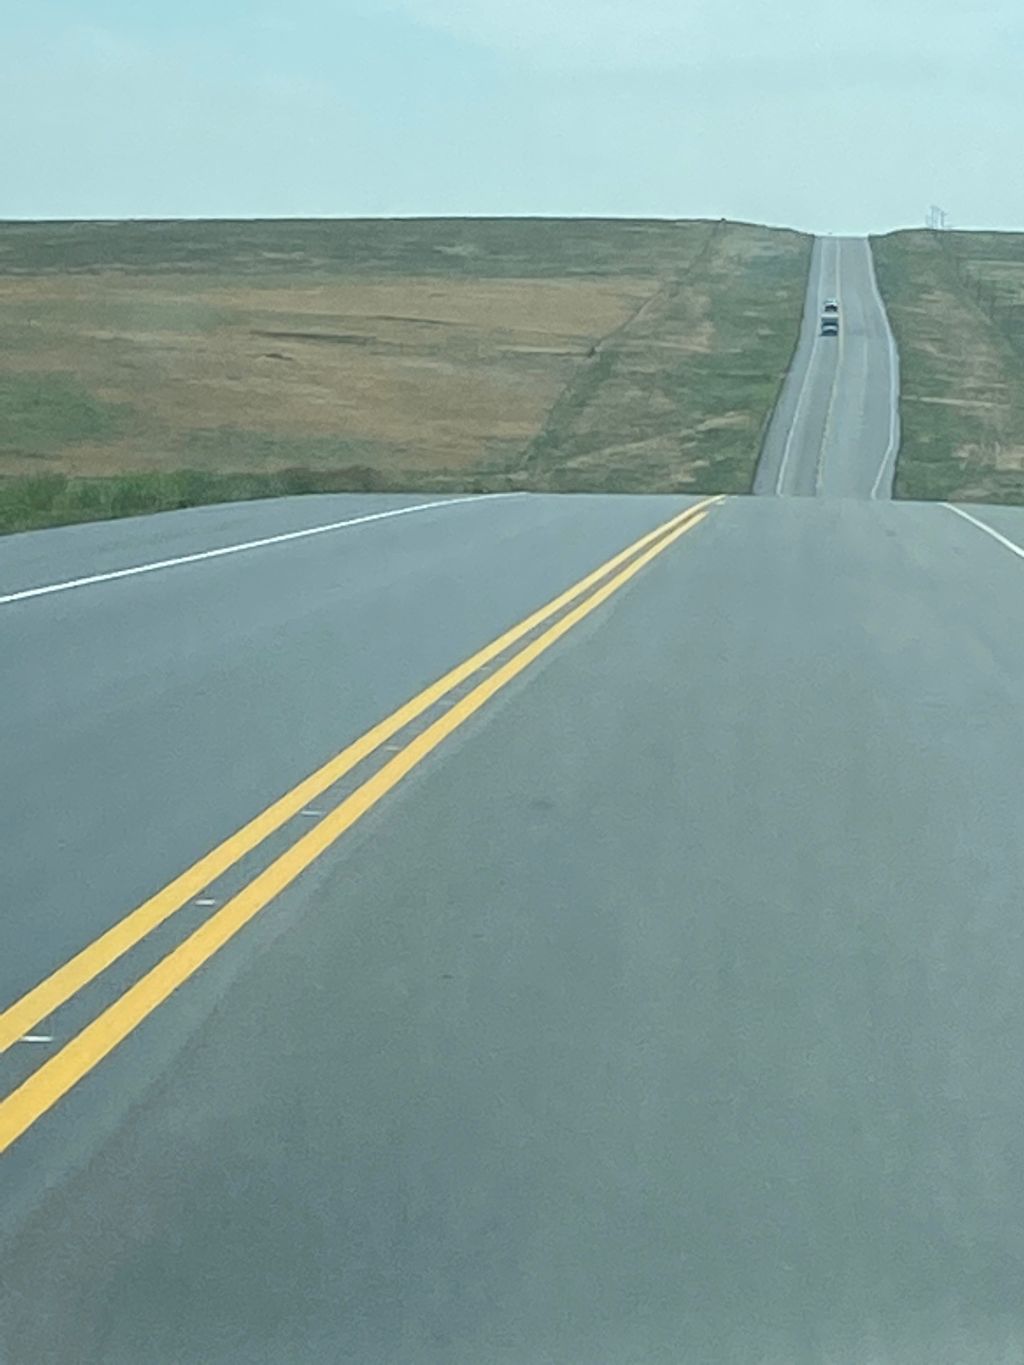 east view newly paved US 36.jpg detail image